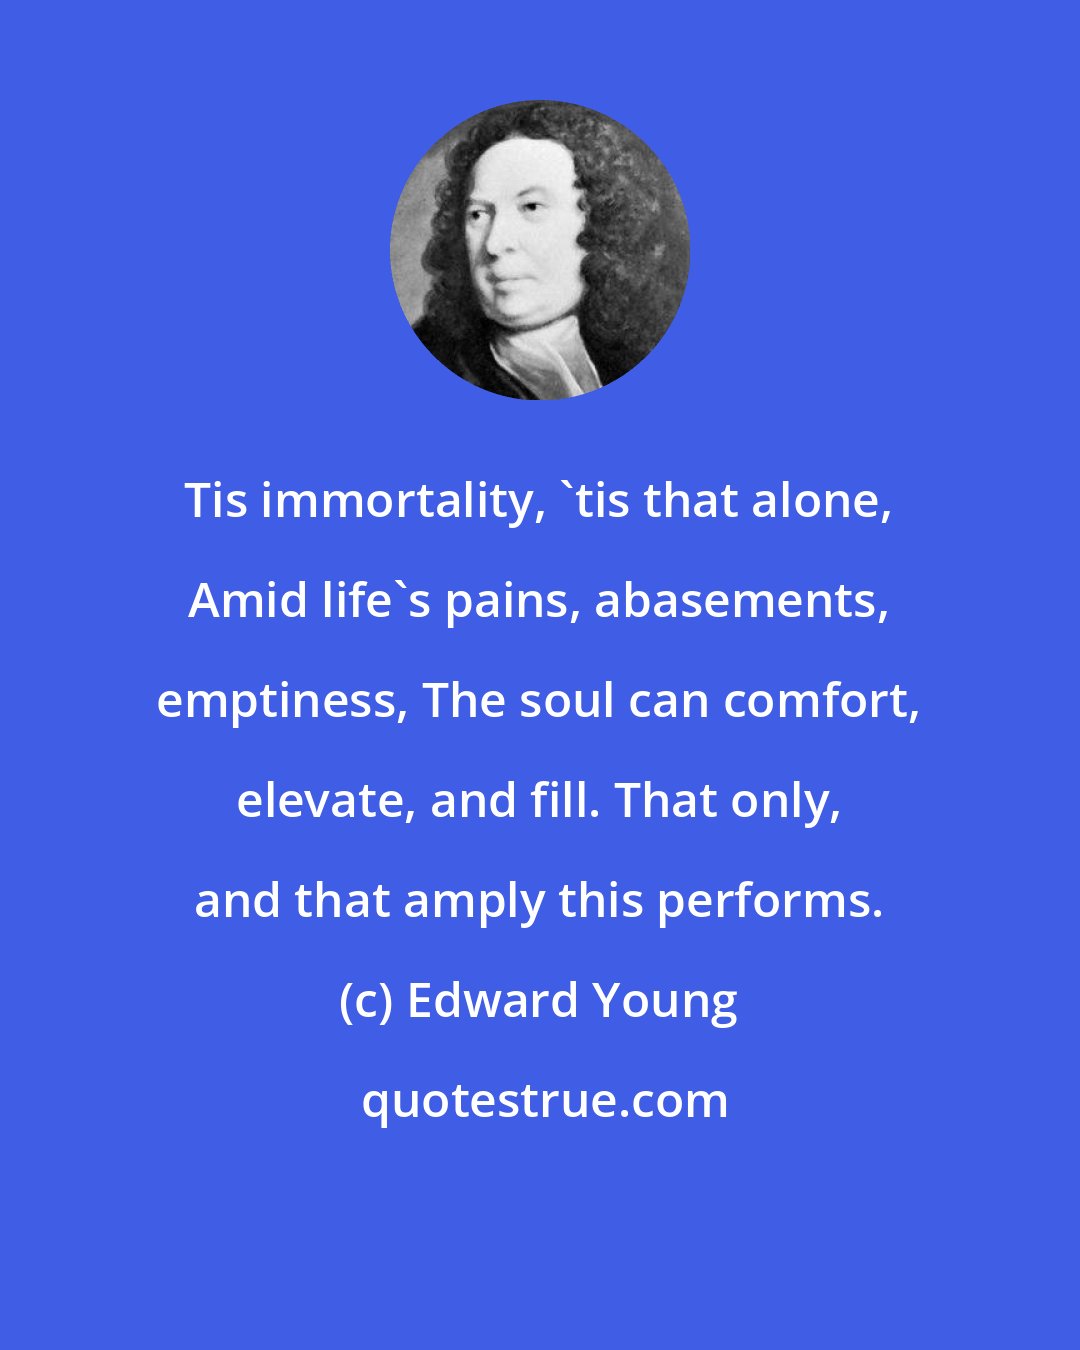 Edward Young: Tis immortality, 'tis that alone, Amid life's pains, abasements, emptiness, The soul can comfort, elevate, and fill. That only, and that amply this performs.